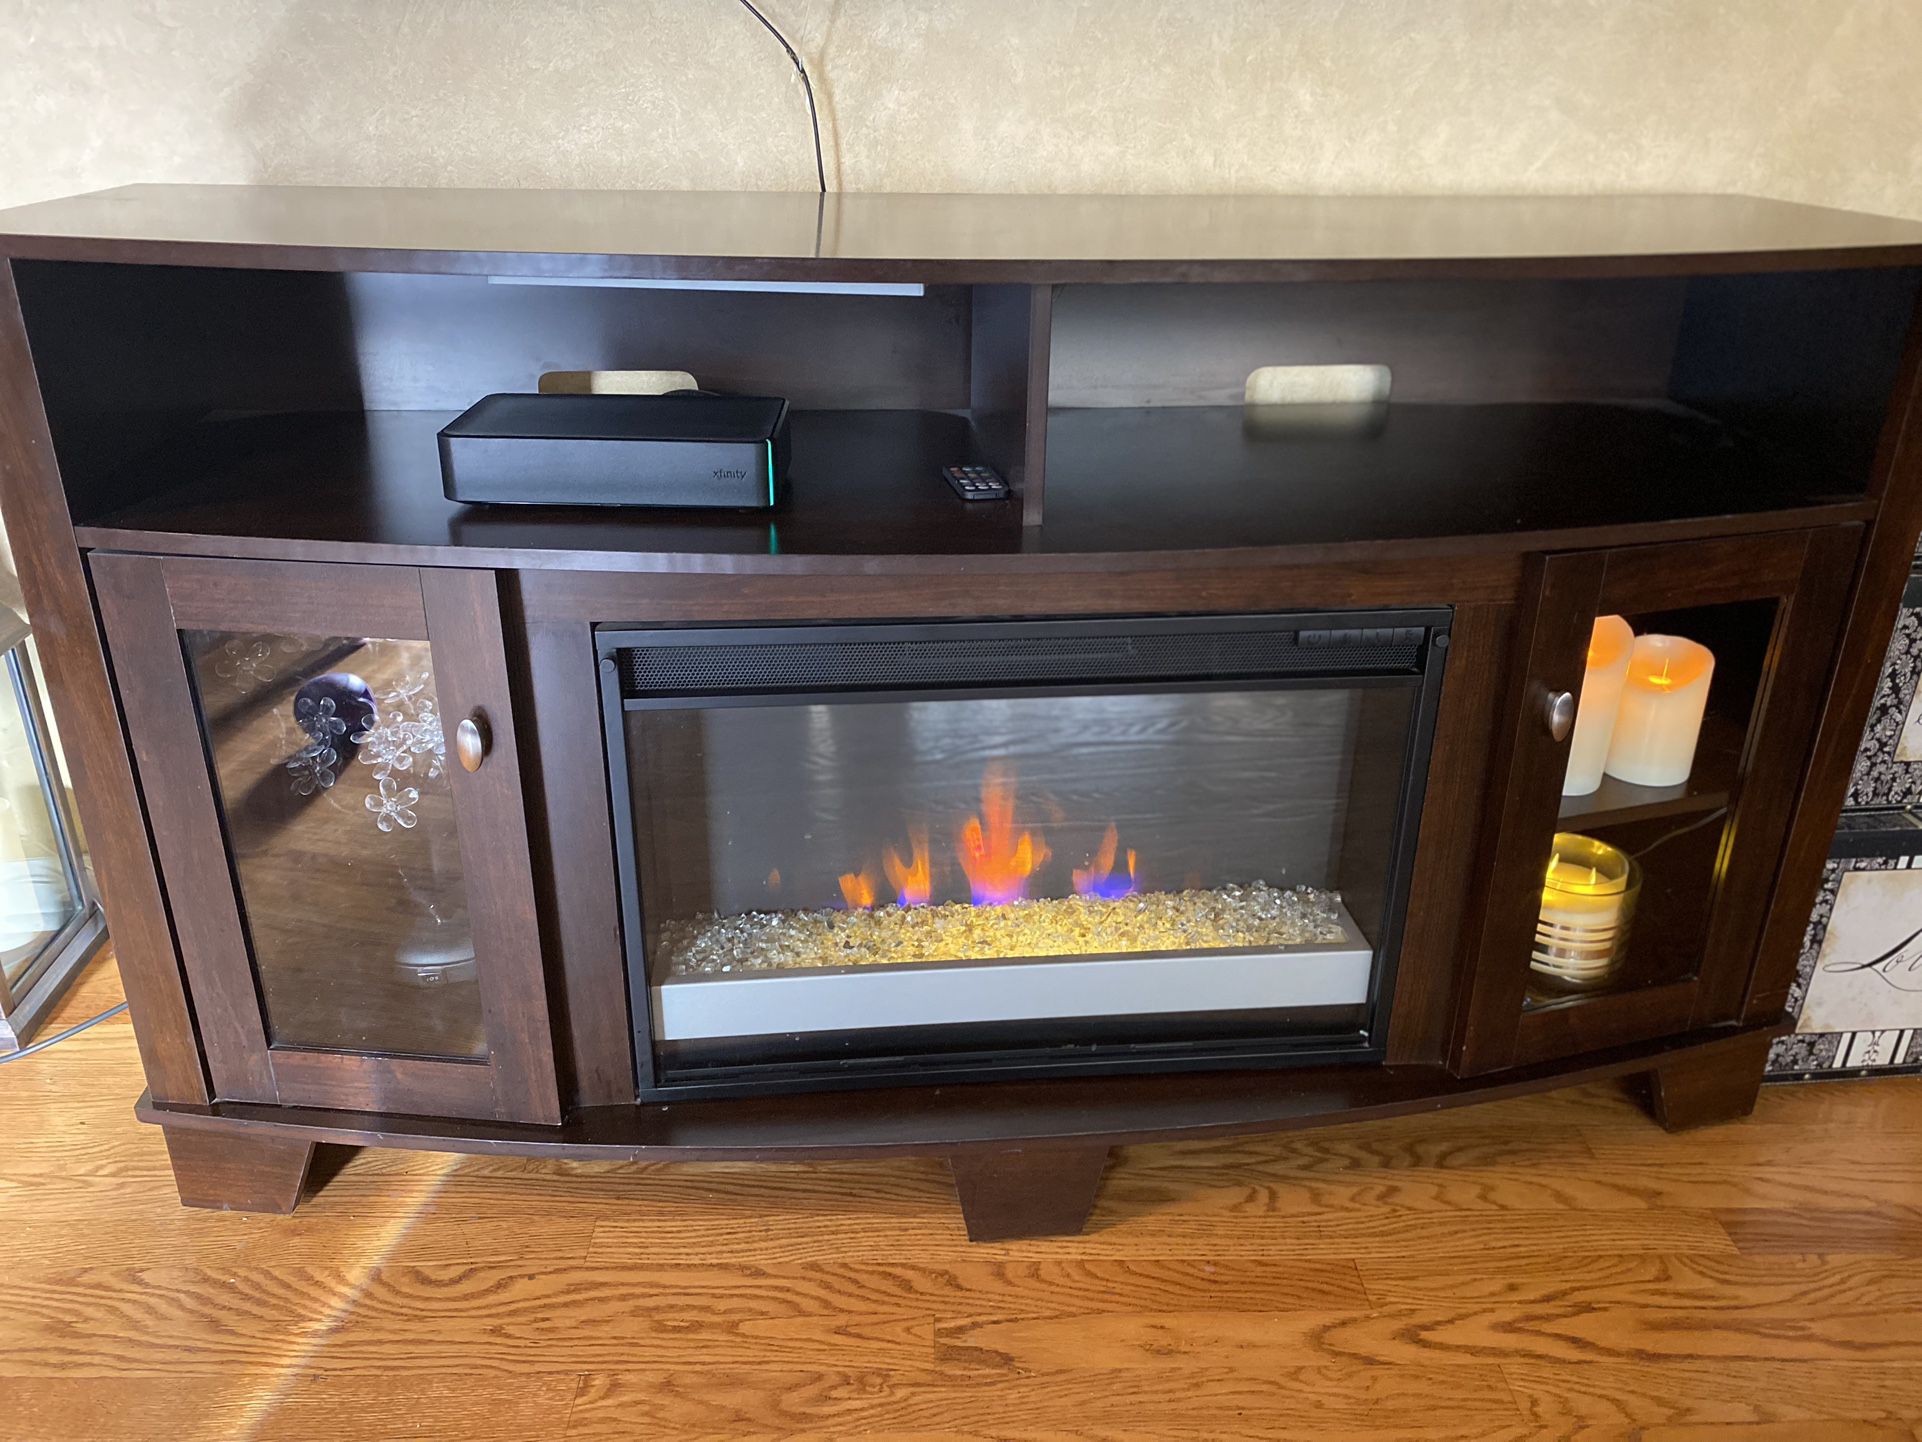 Electric Fireplace With Heater & Remote